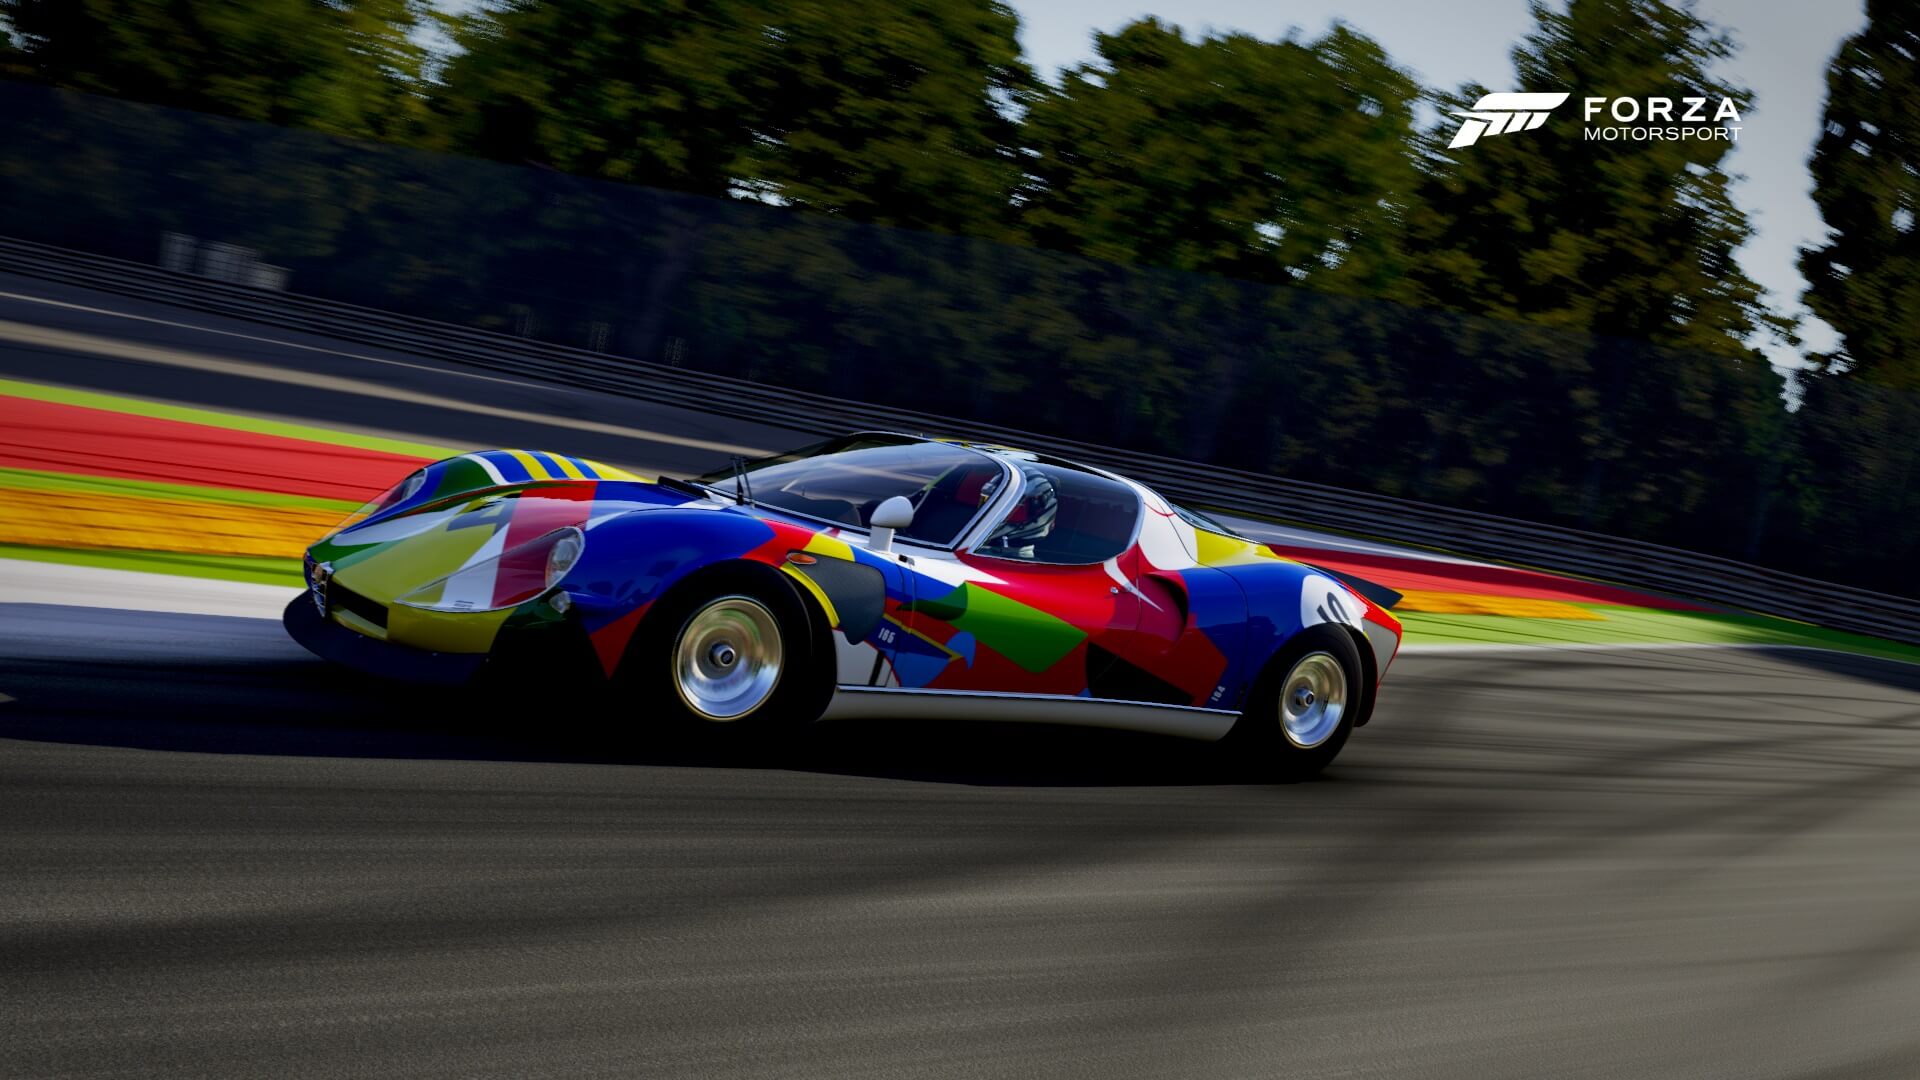 A colorful car driving down a race track
